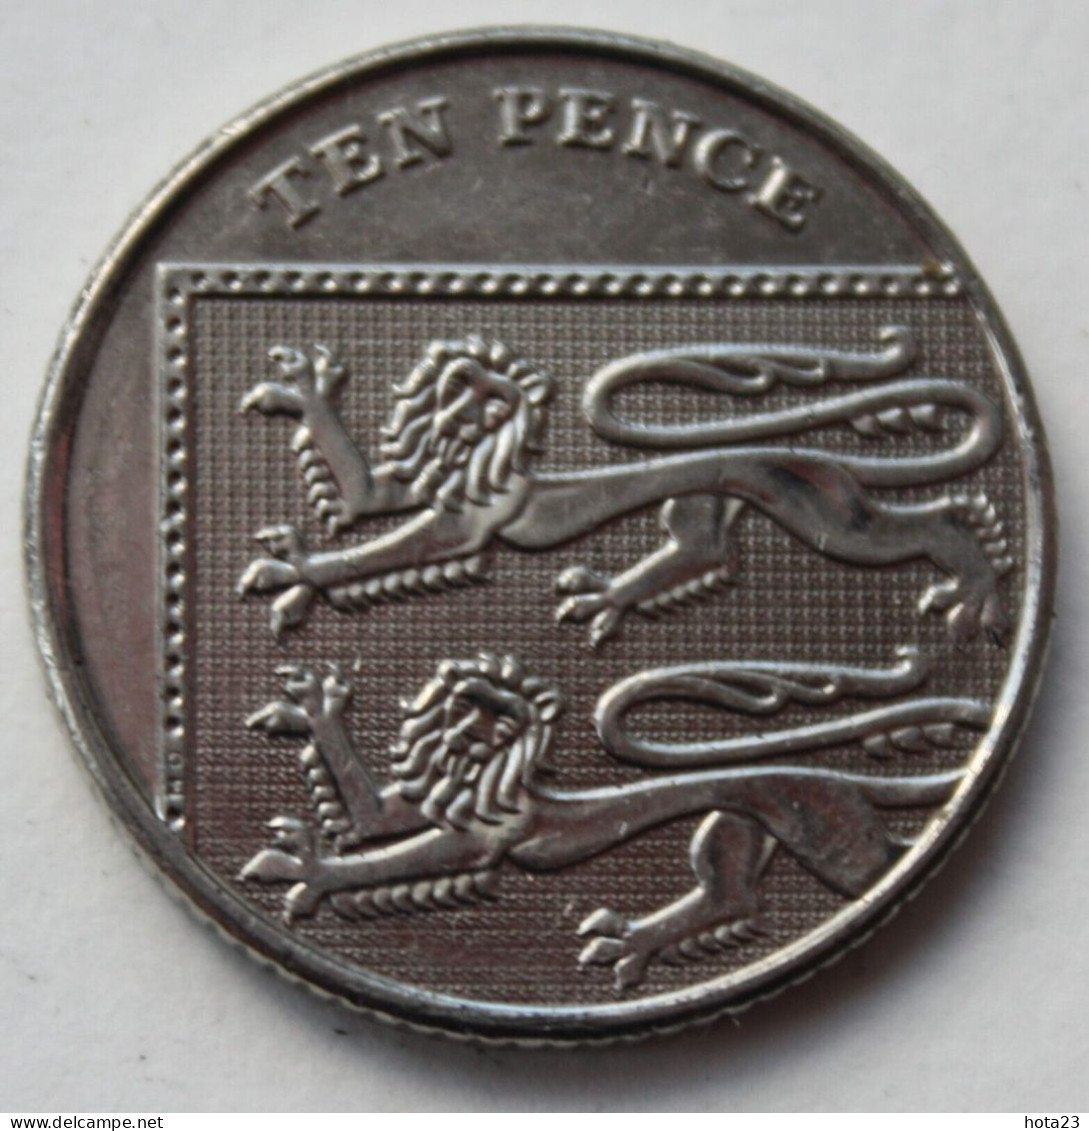 2012 - 10 Ten Pence; United Kingdom; England; Great Britain; Circulated - 10 Pence & 10 New Pence